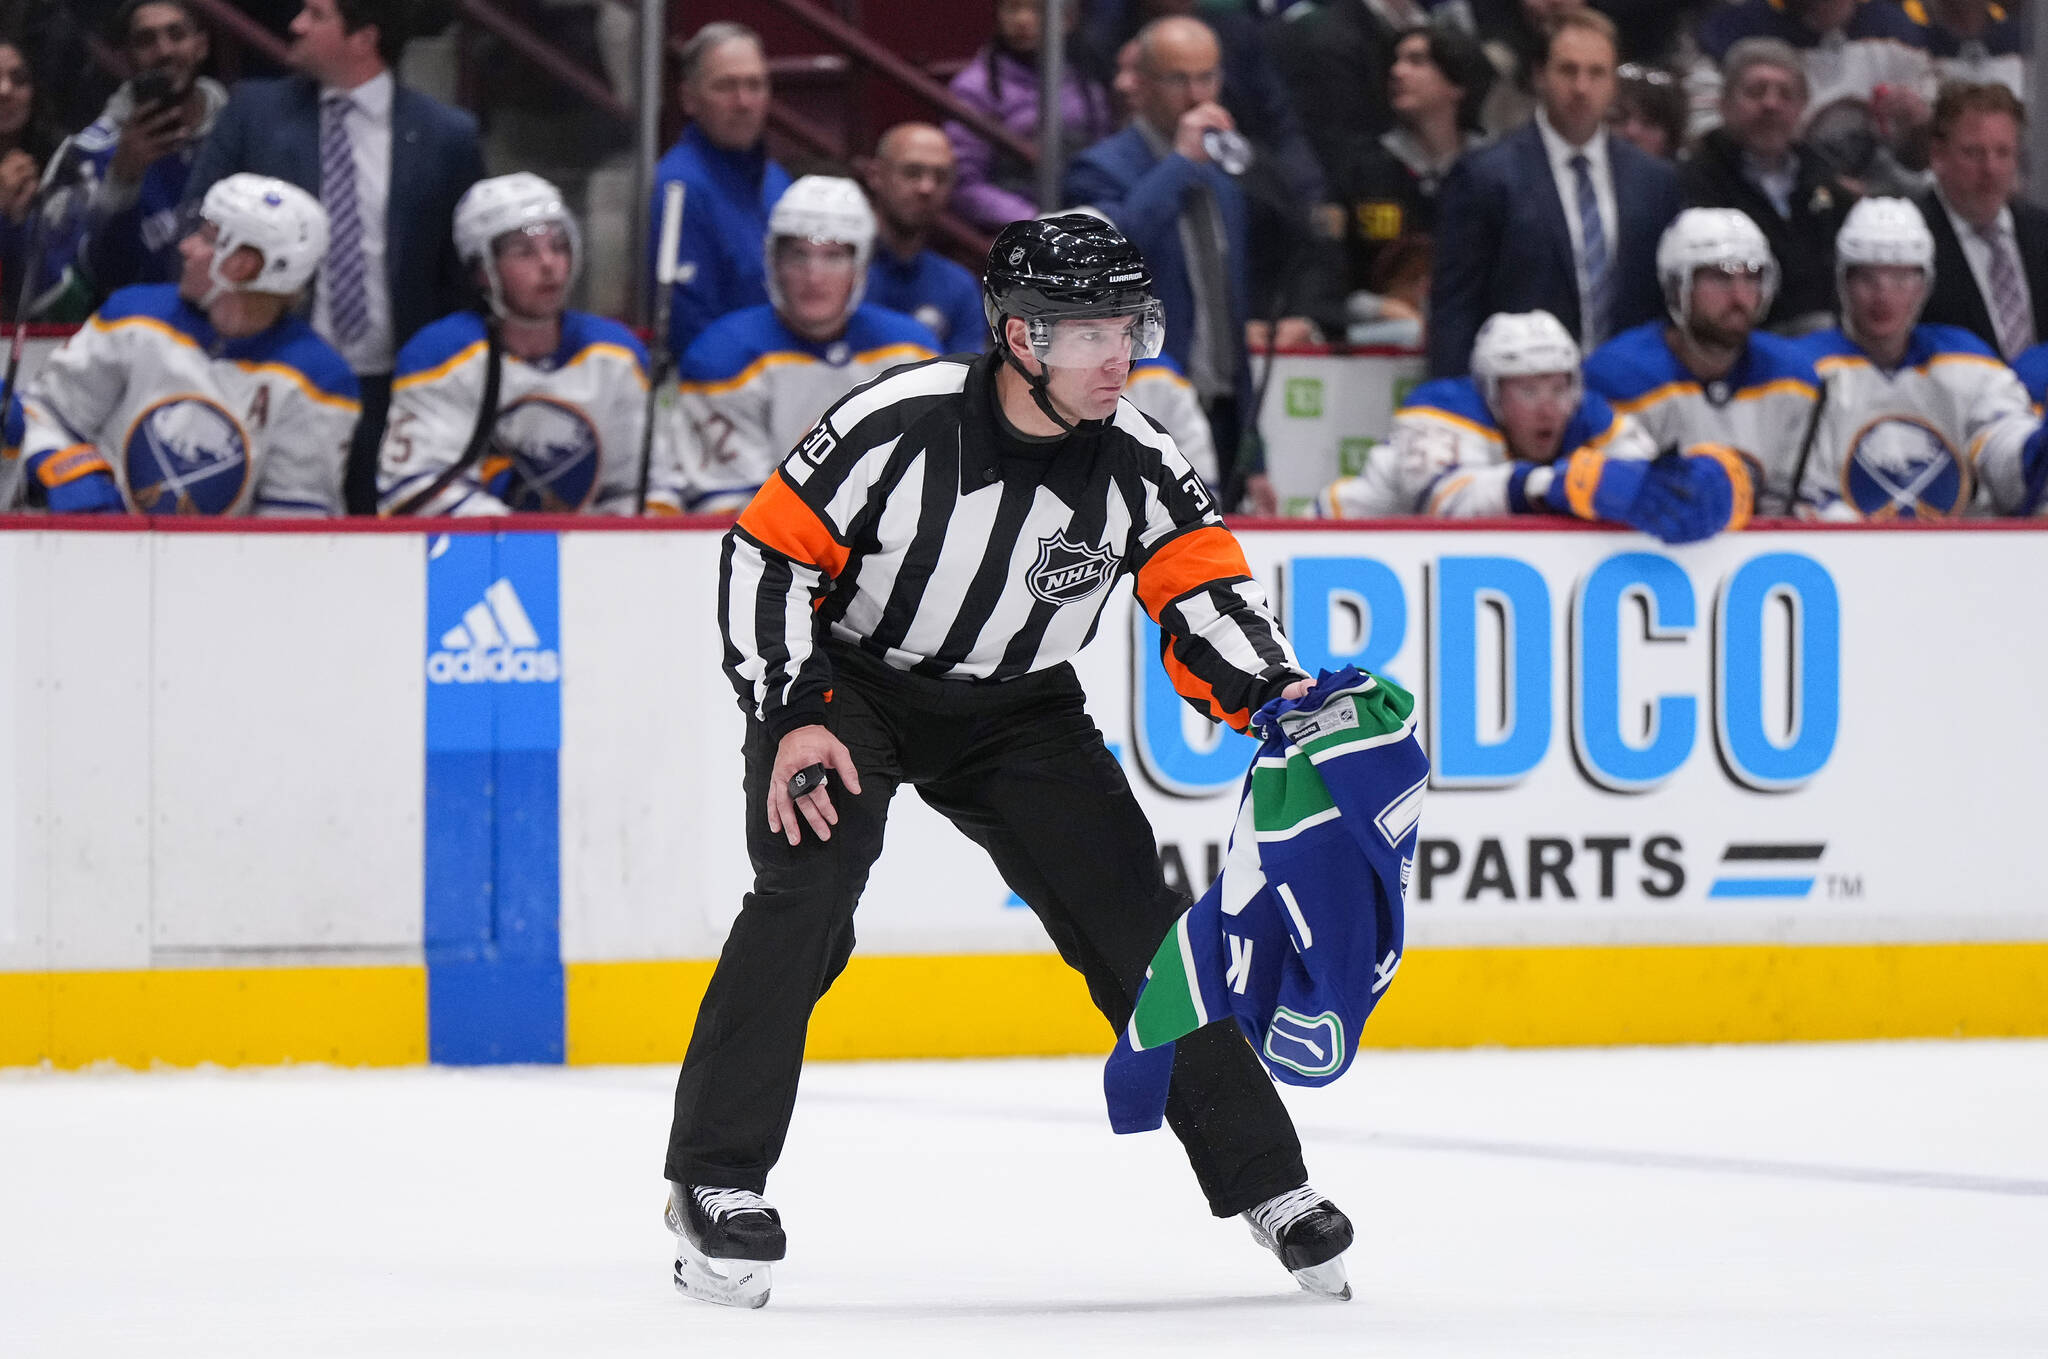 Referee Kendrick Nicholson picks up a Vancouver Canucks jersey that was thrown onto the ice by a fan as the team plays the Buffalo Sabres during the third period of an NHL hockey game in Vancouver, on Saturday, October 22, 2022. THE CANADIAN PRESS/Darryl Dyck